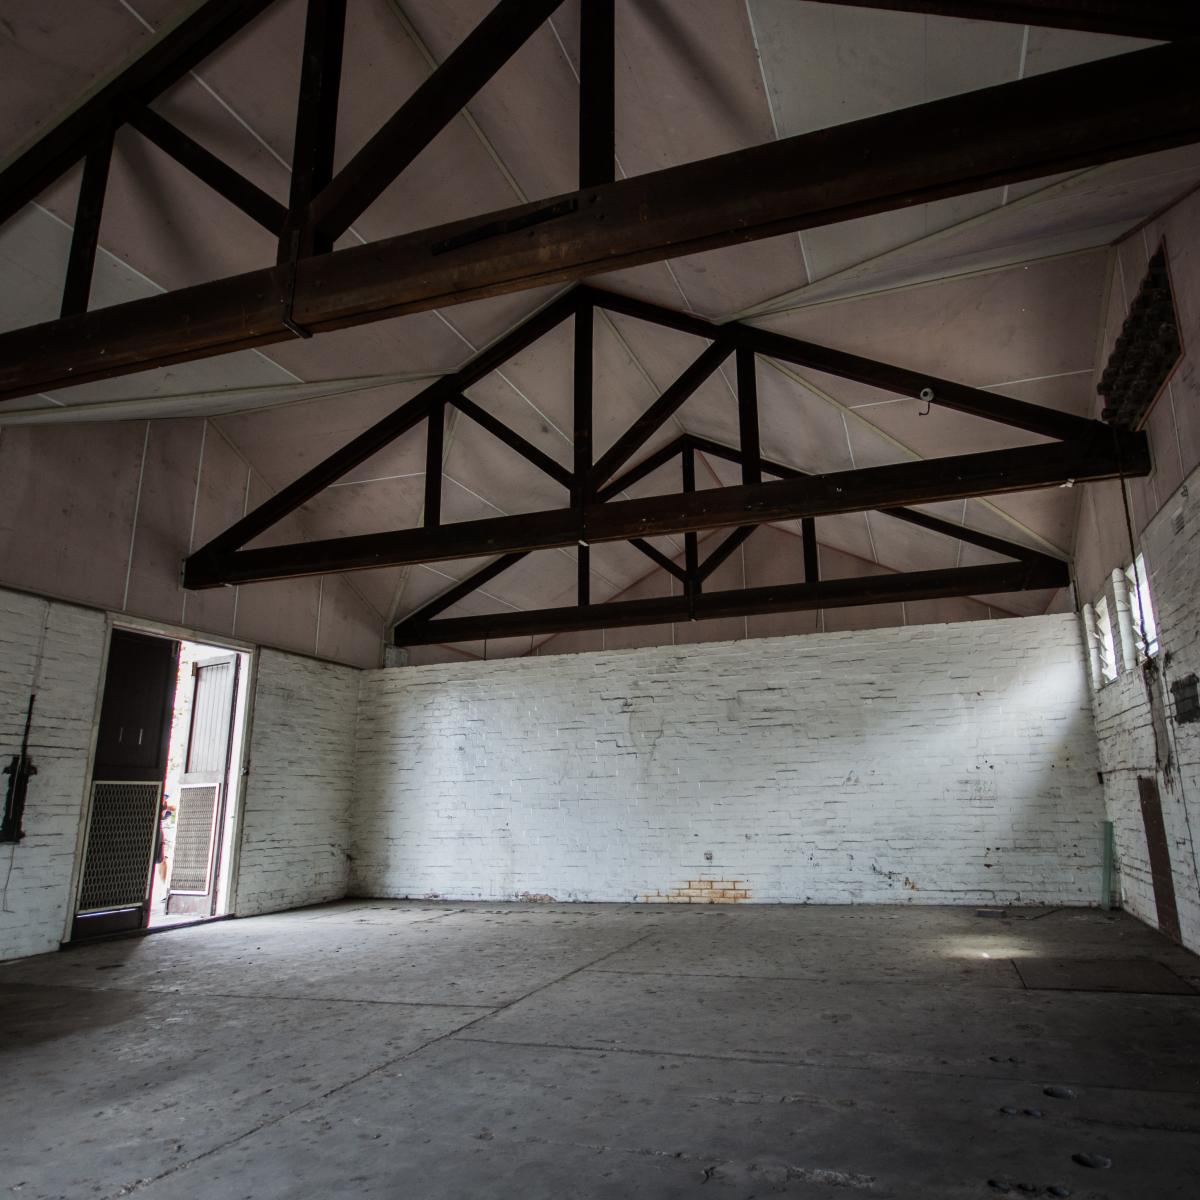 This is an image of the interior of the local heritage place known as Electrical Substation No. 5 at Woolloongabba.